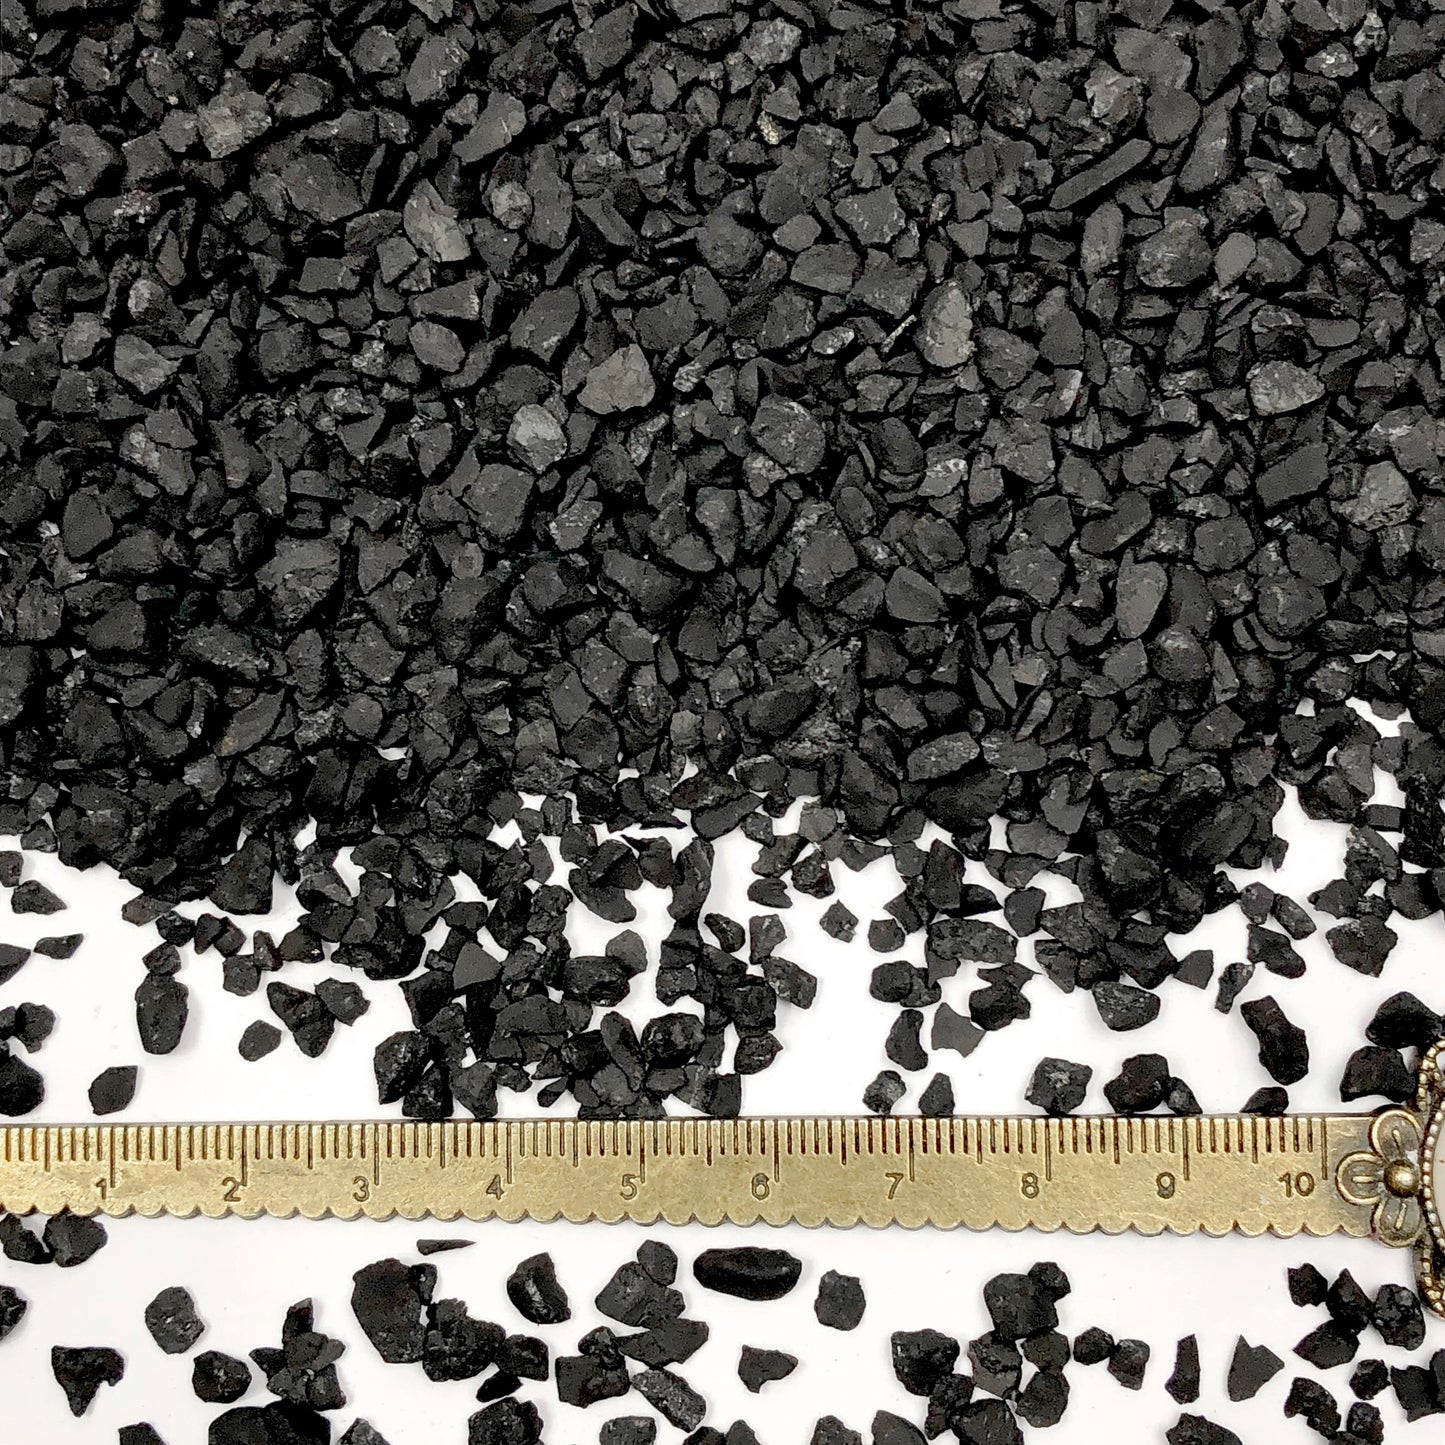 Crushed Black Shungite from Russia, Coarse Crush, Gravel Size, 4mm - 2mm